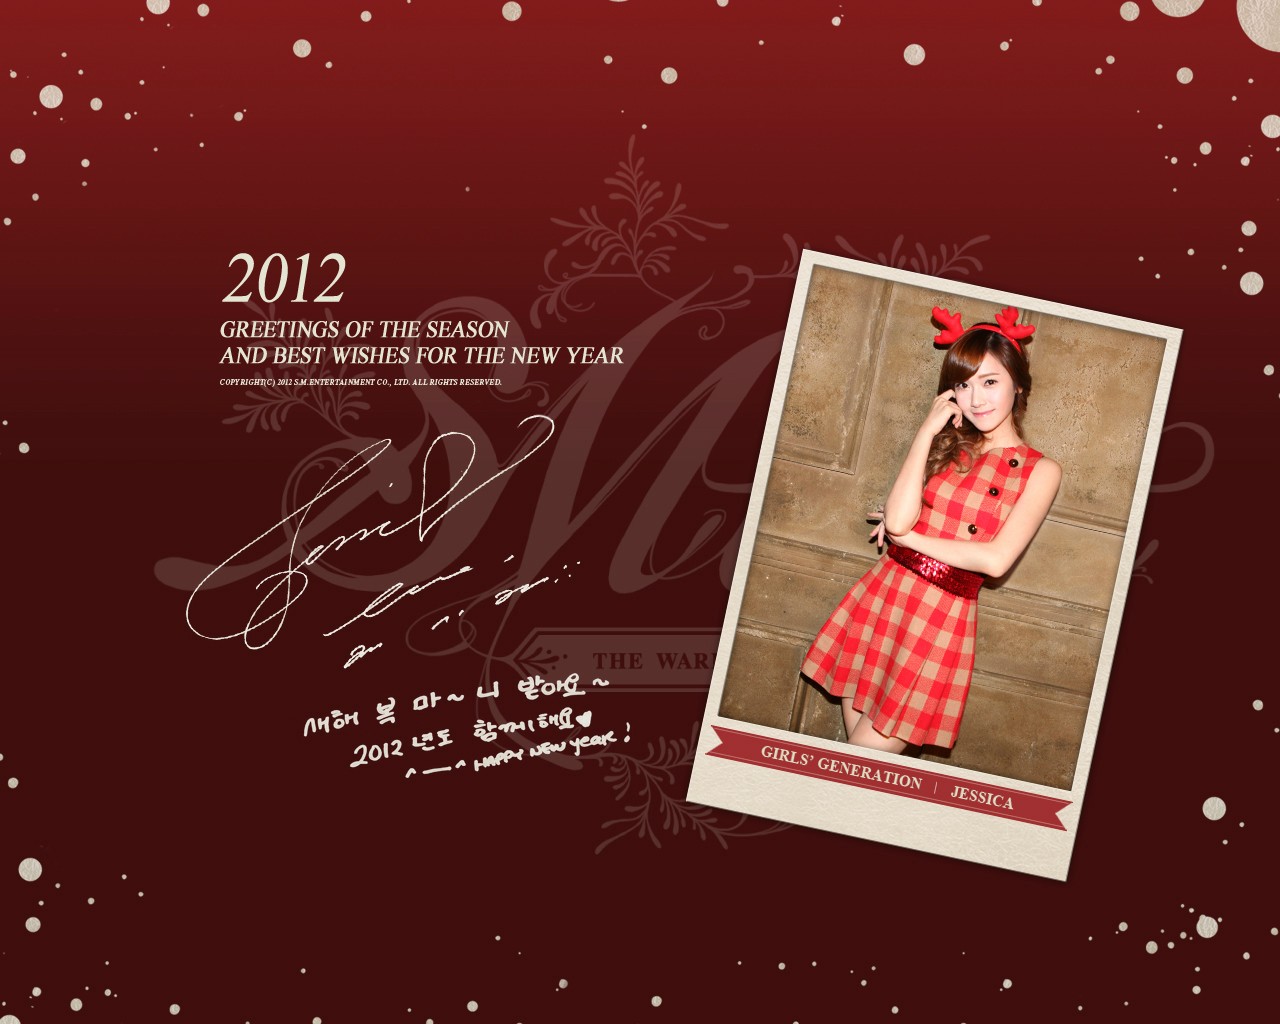 SNSD @ 2012 Official New Year Message AanobUqh